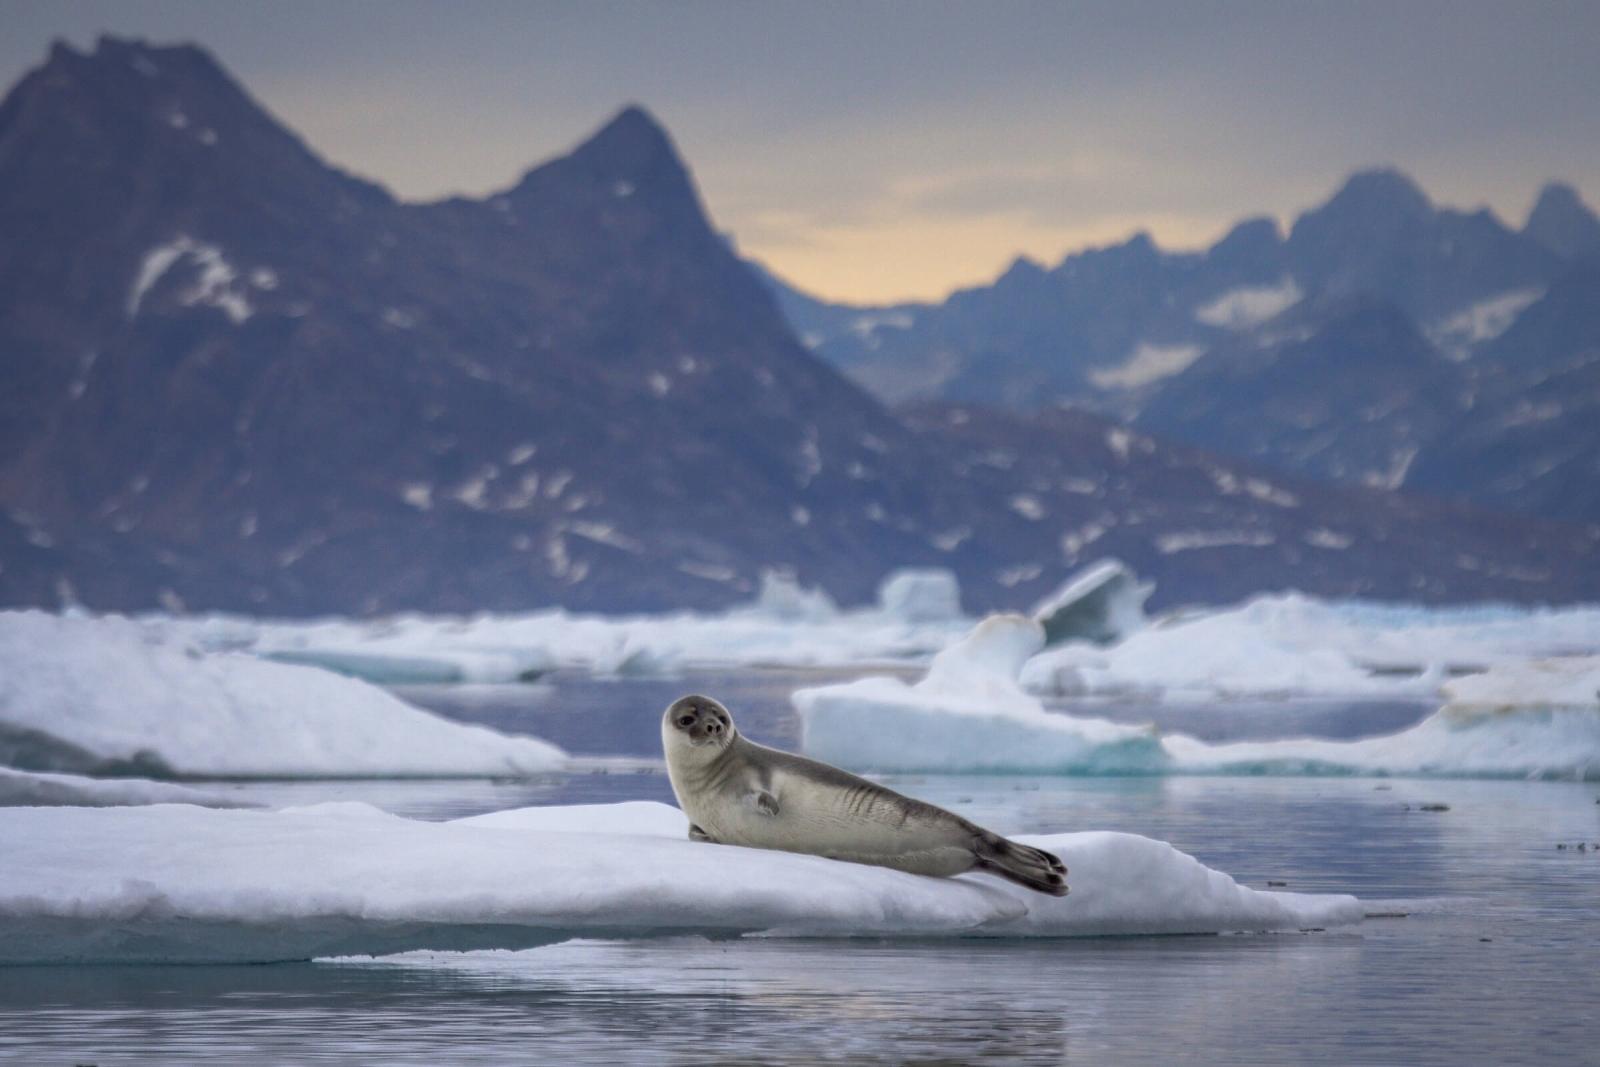 A hooded seal on an ice floe in East Greenland. Photo by Aqqa Rosing Asvid.